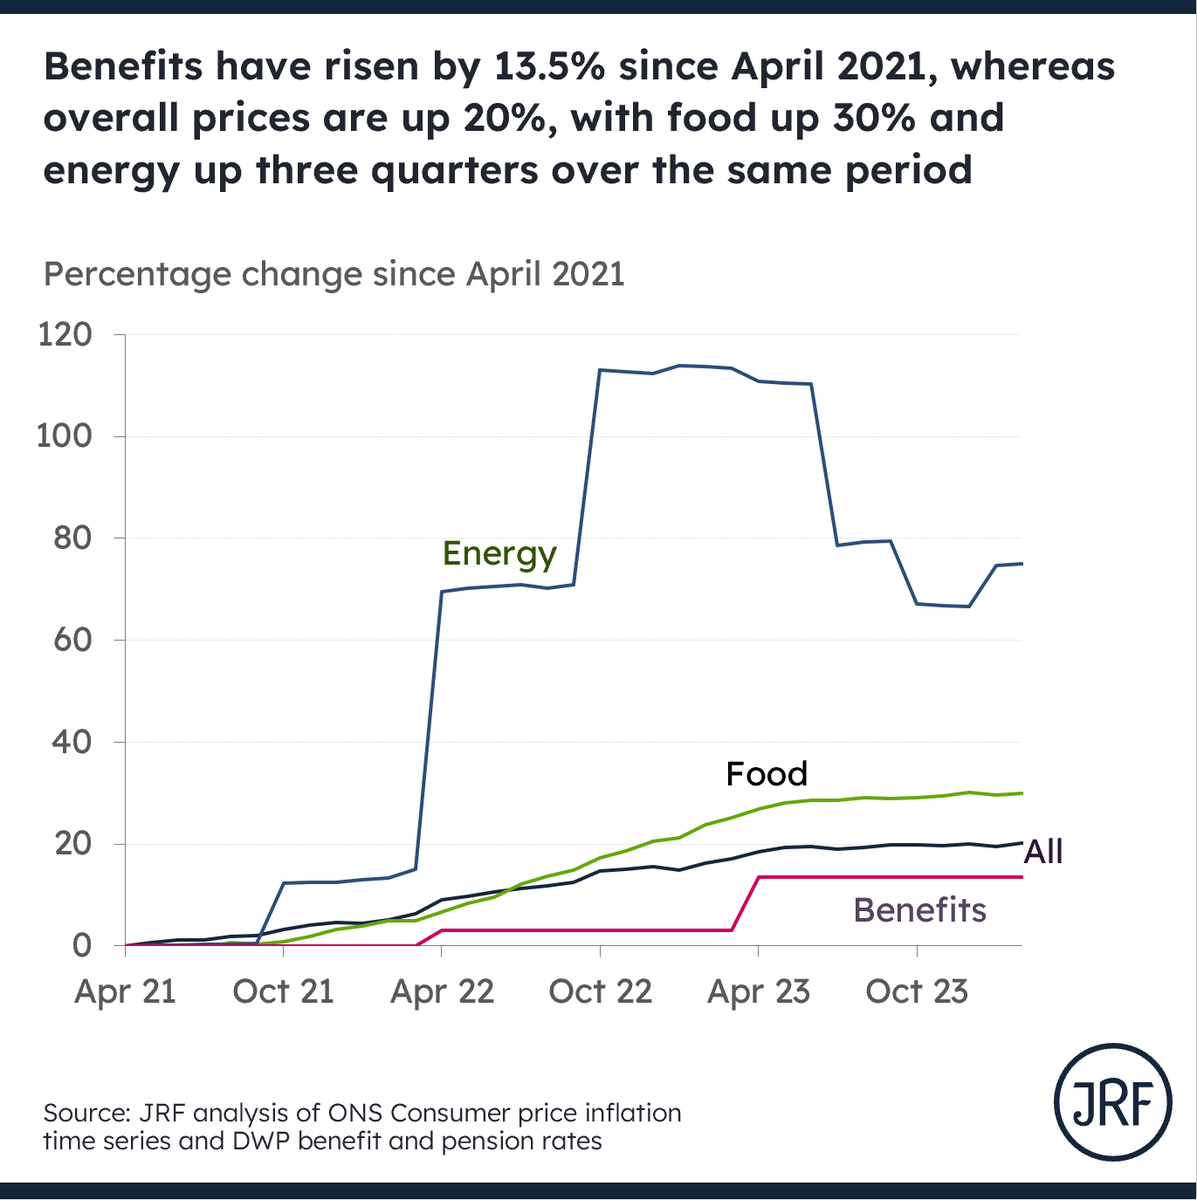 A reminder that despite it being good news that inflation has come down a lot today, benefit increases still lag behind overall, food and energy inflation, with the gap opening up over the last three years. Overall inflation up 20%, food up 30%, energy up 75%, benefits up 13.5%.